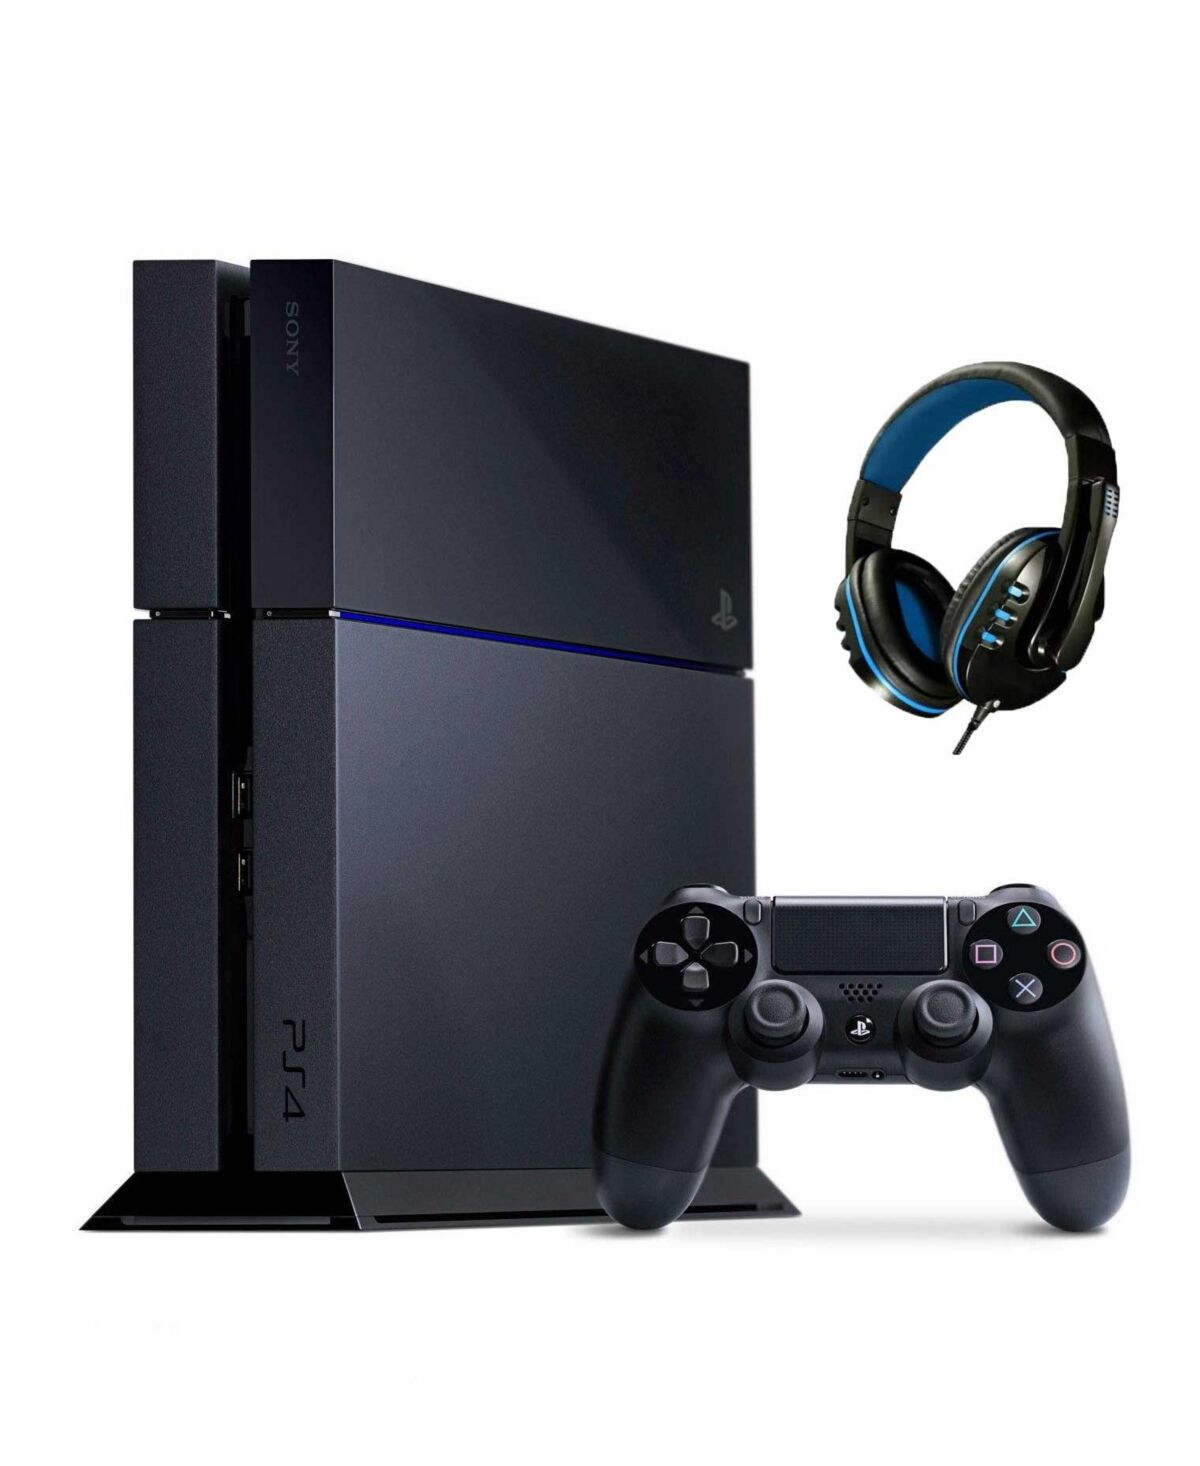 Bolt Axtion PlayStation 4 500GB Gaming Console Black with Bolt Axtion Bundle Like New - Black